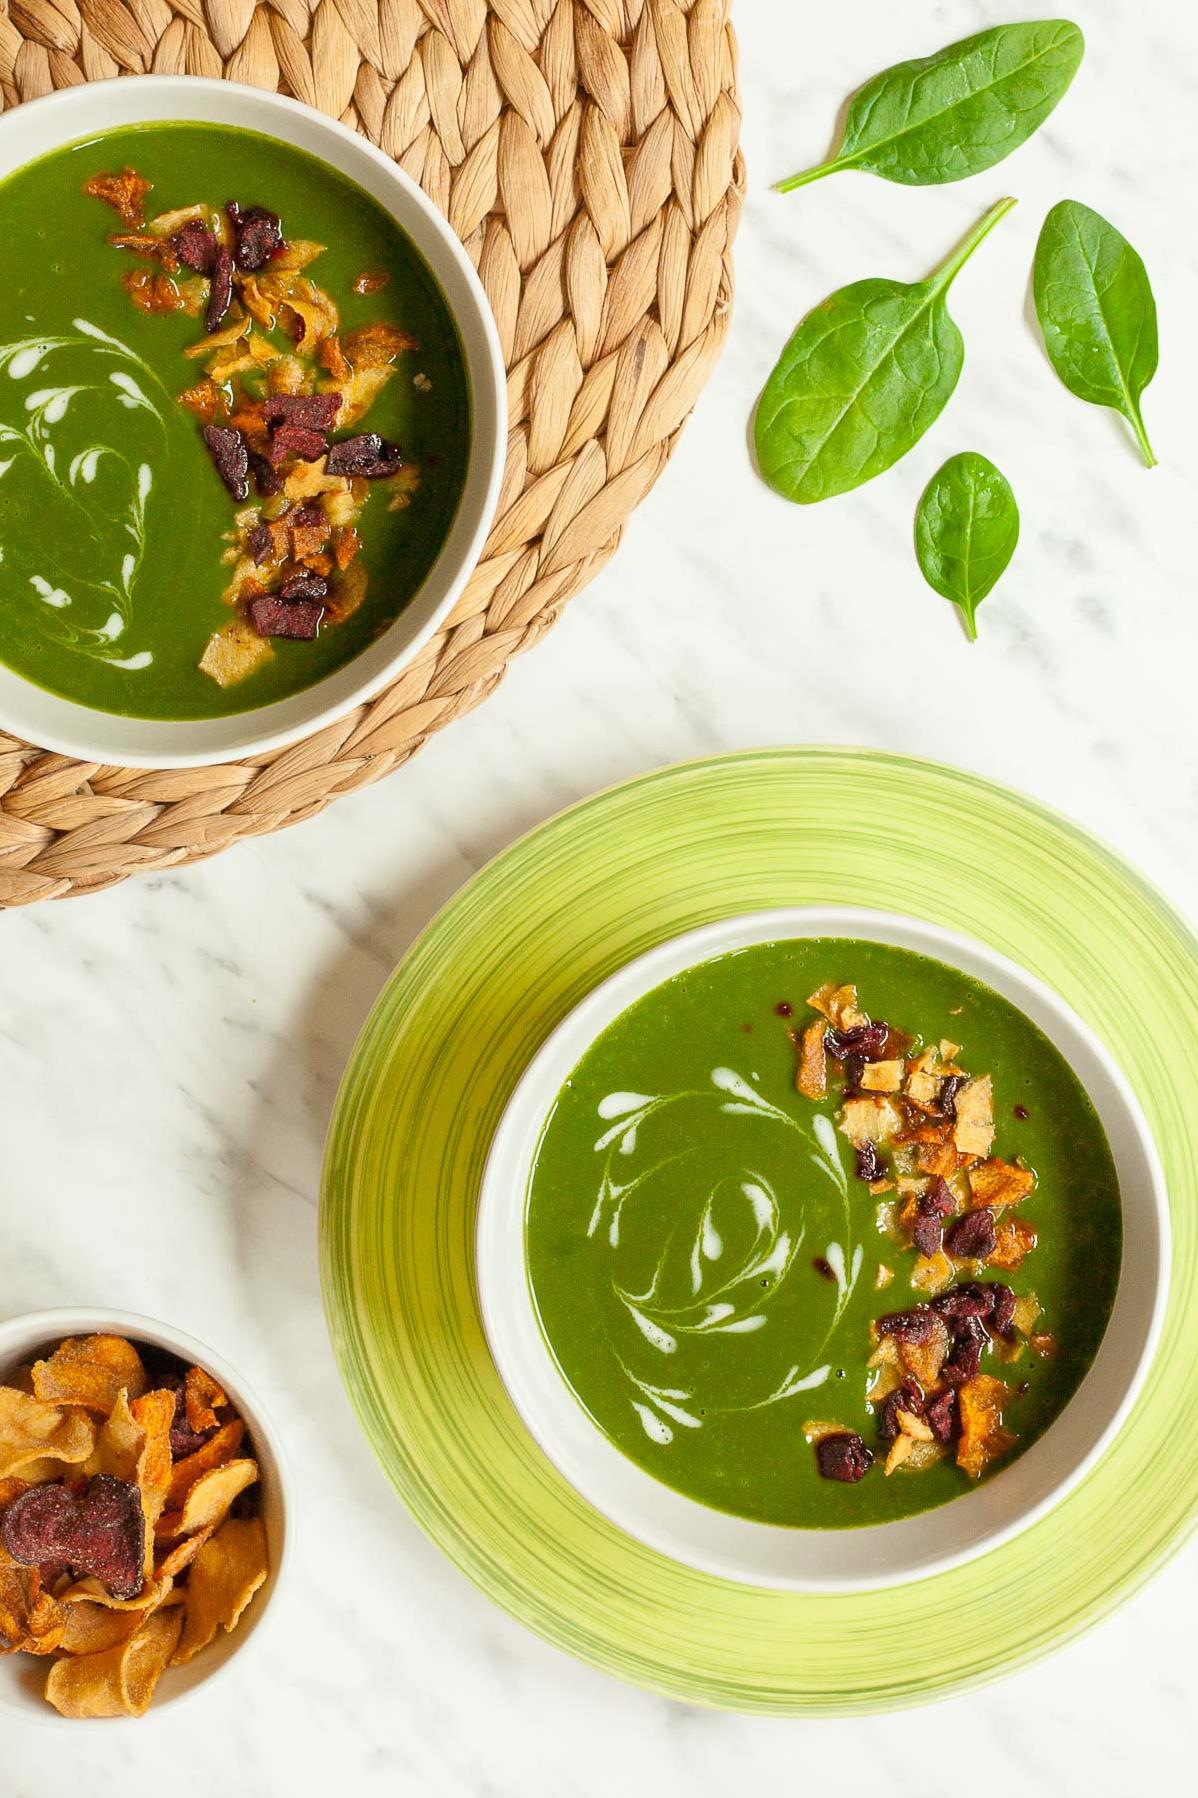  Dive into this vibrant soup bursting with green splendor.